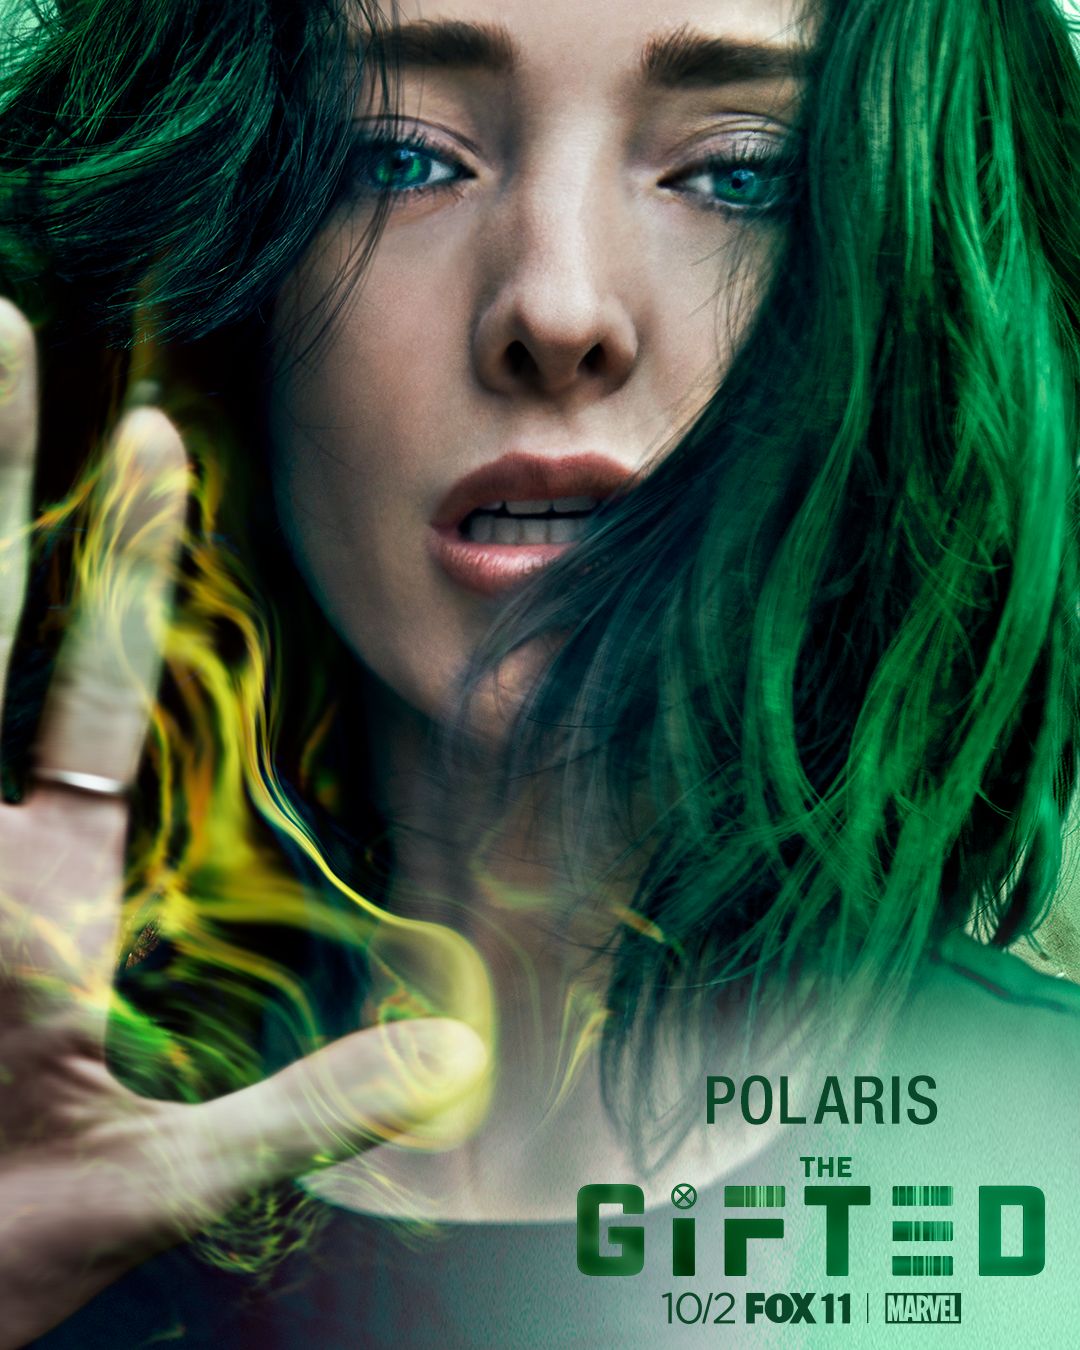 Polaris goes into labor in first look photo from 'The Gifted' season 2